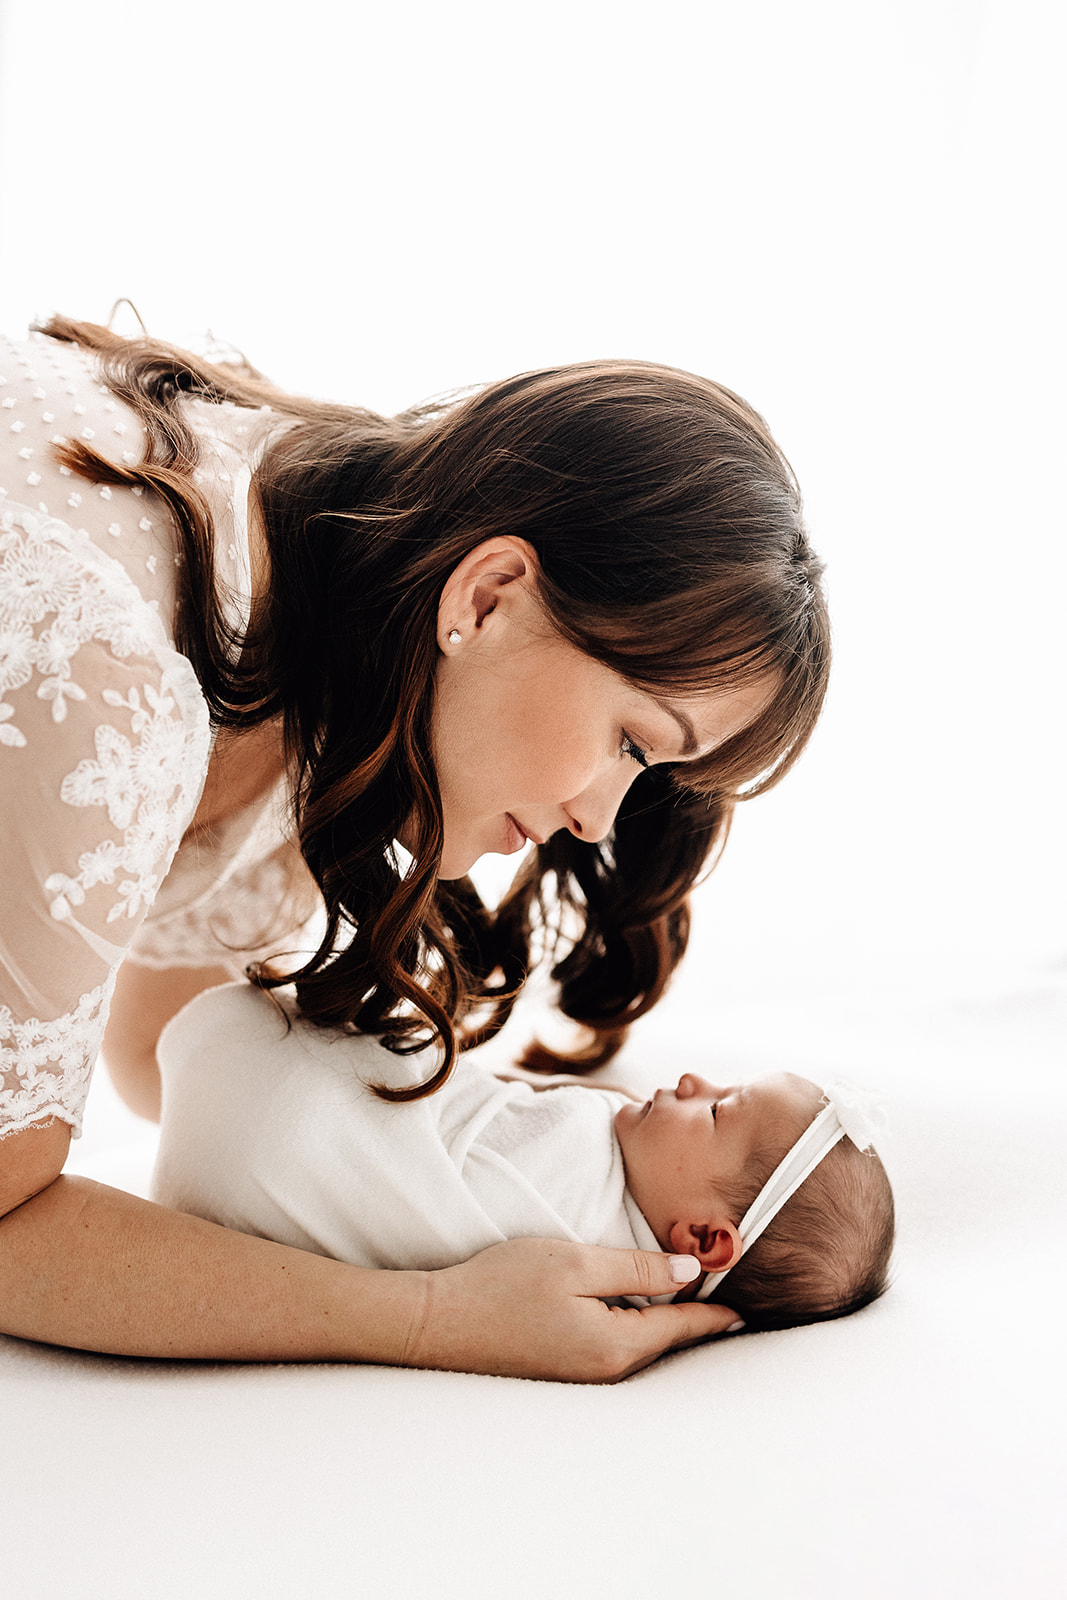 A new mom leans over her newborn baby on a white bed in a white lace bed Barefoot Midwife